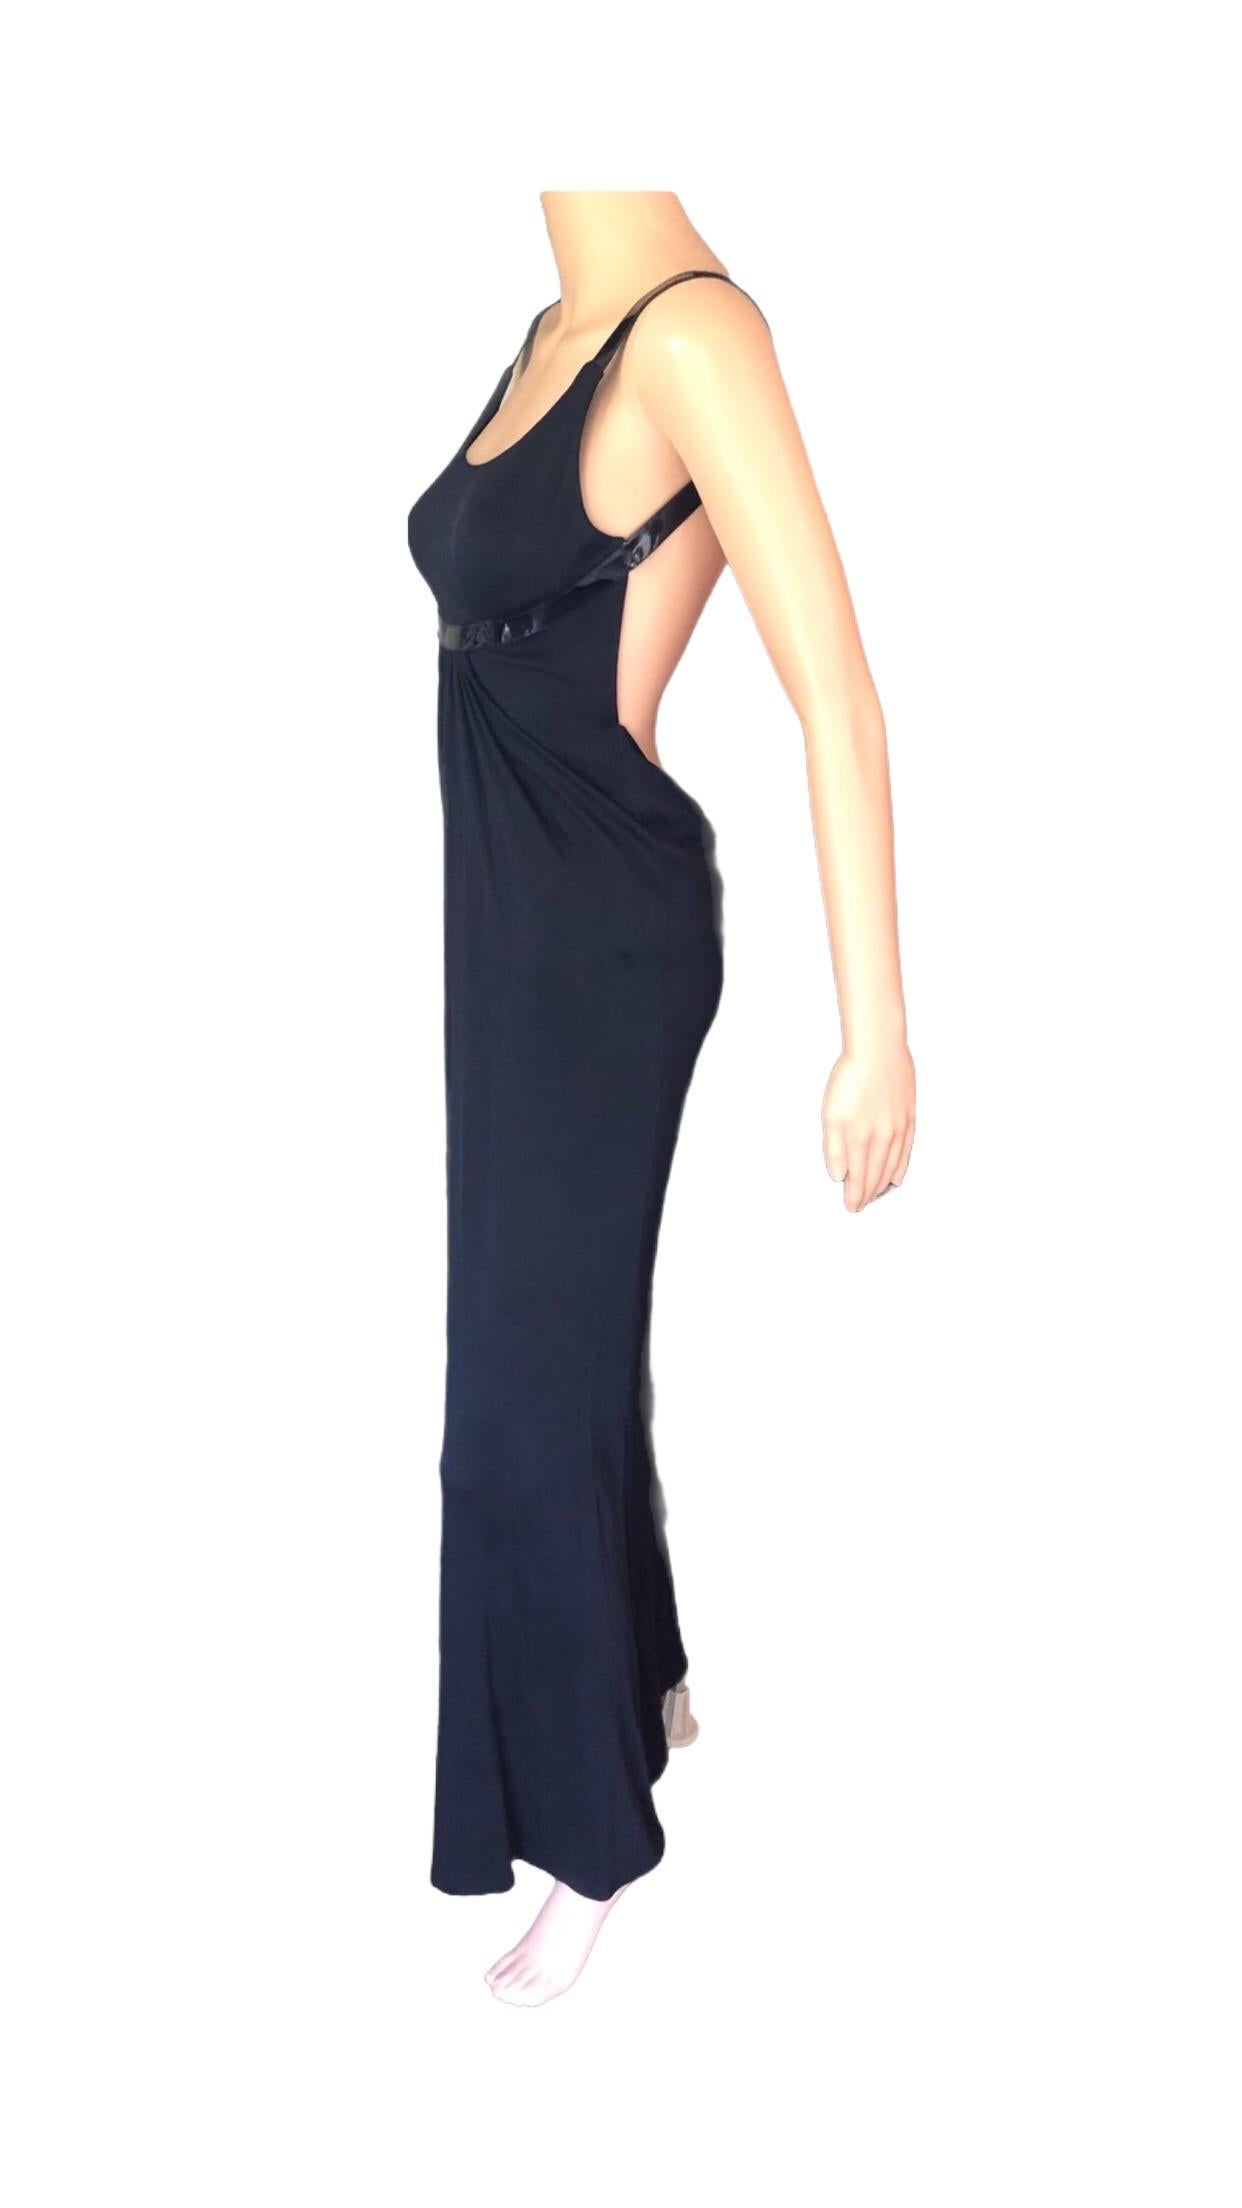 1999 Gucci by Tom Ford Silk Draped Open Back Black Dress Gown For Sale 4